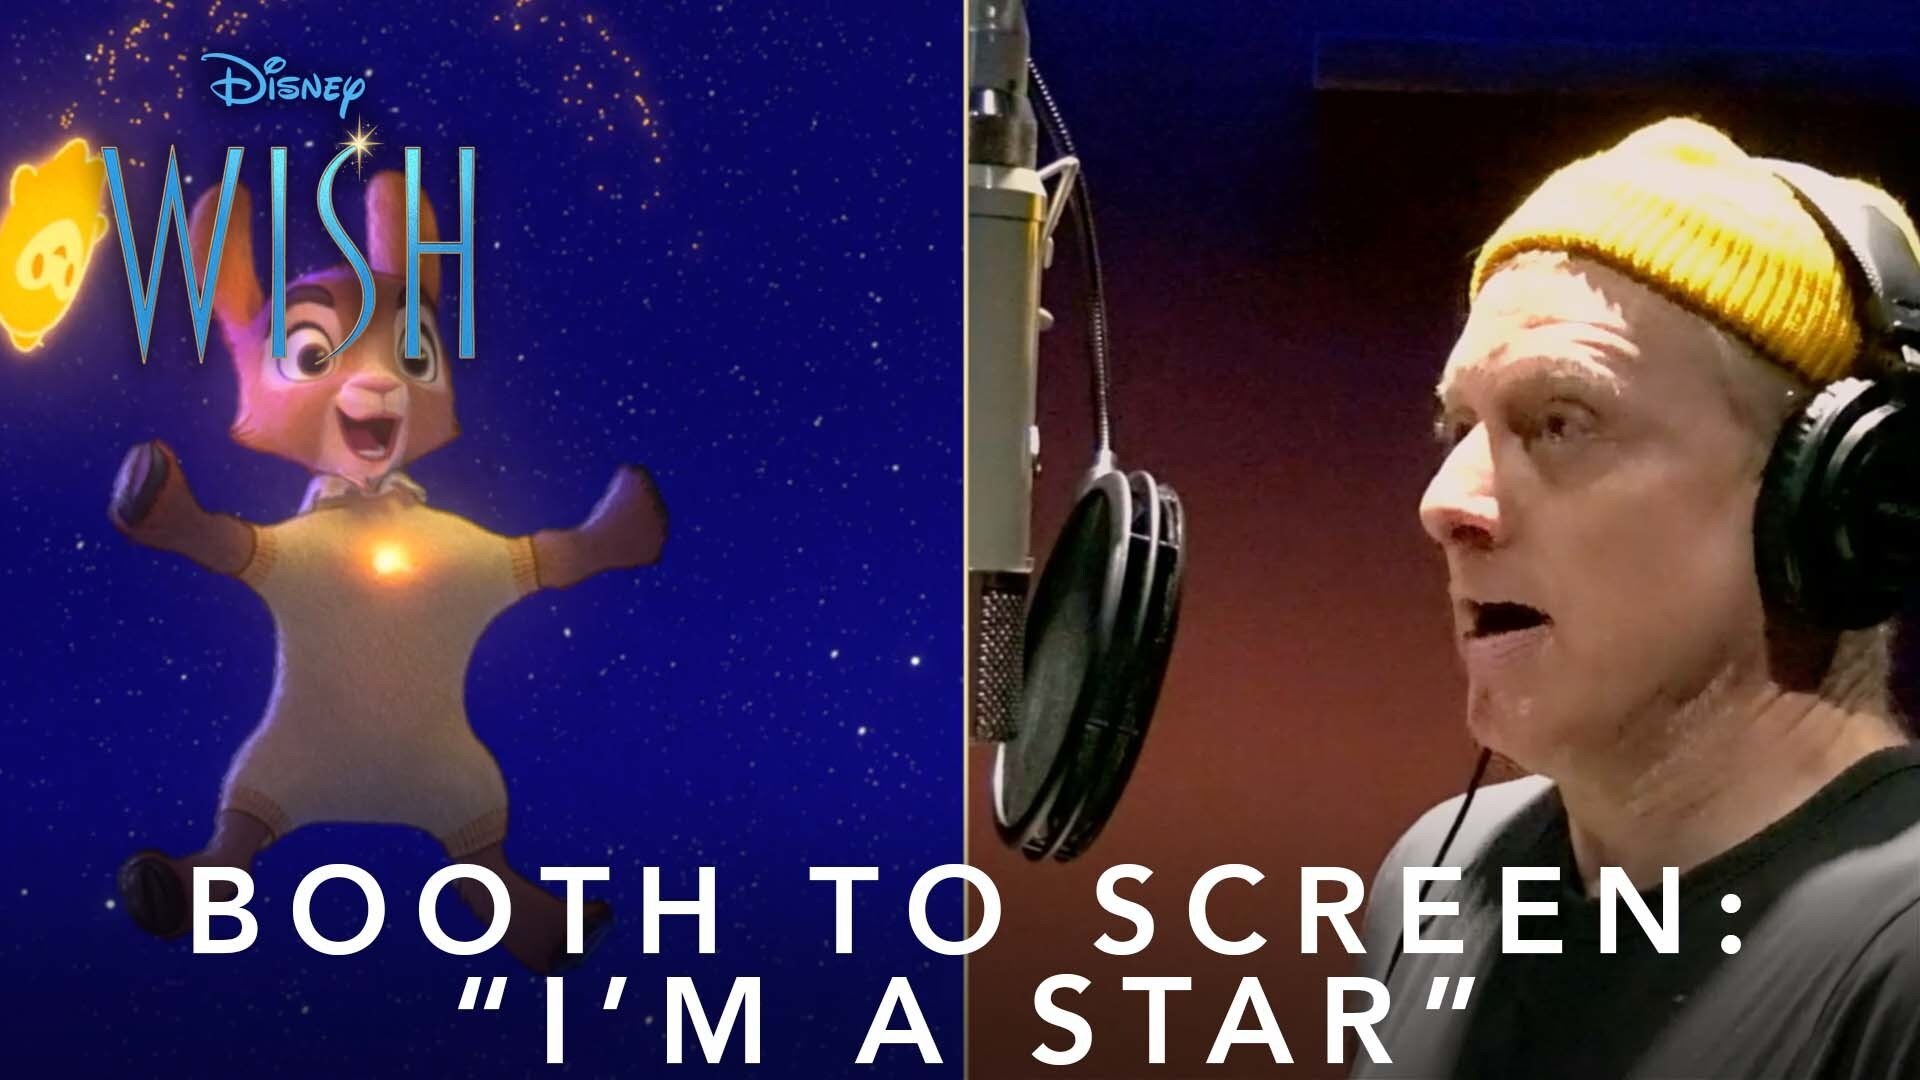 Disney's Wish | Booth-to-Screen: "I'm A Star"